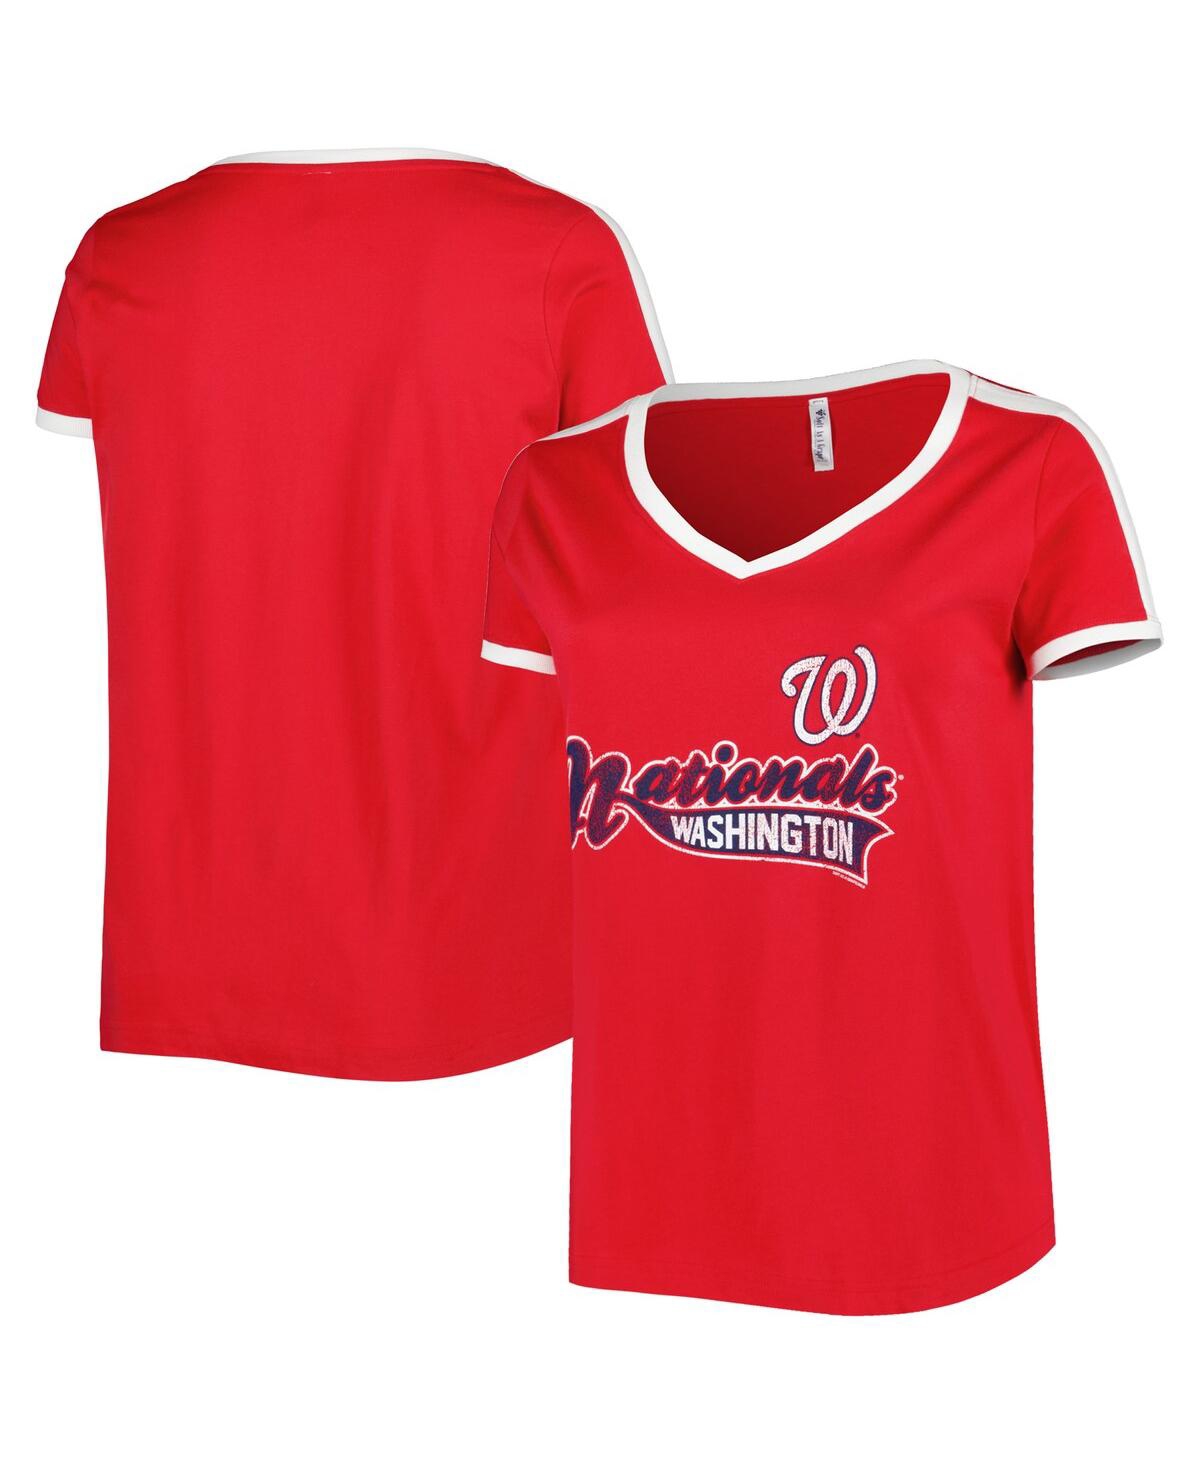 Women's Soft As A Grape Red Washington Nationals Plus Size V-Neck T-shirt - Red